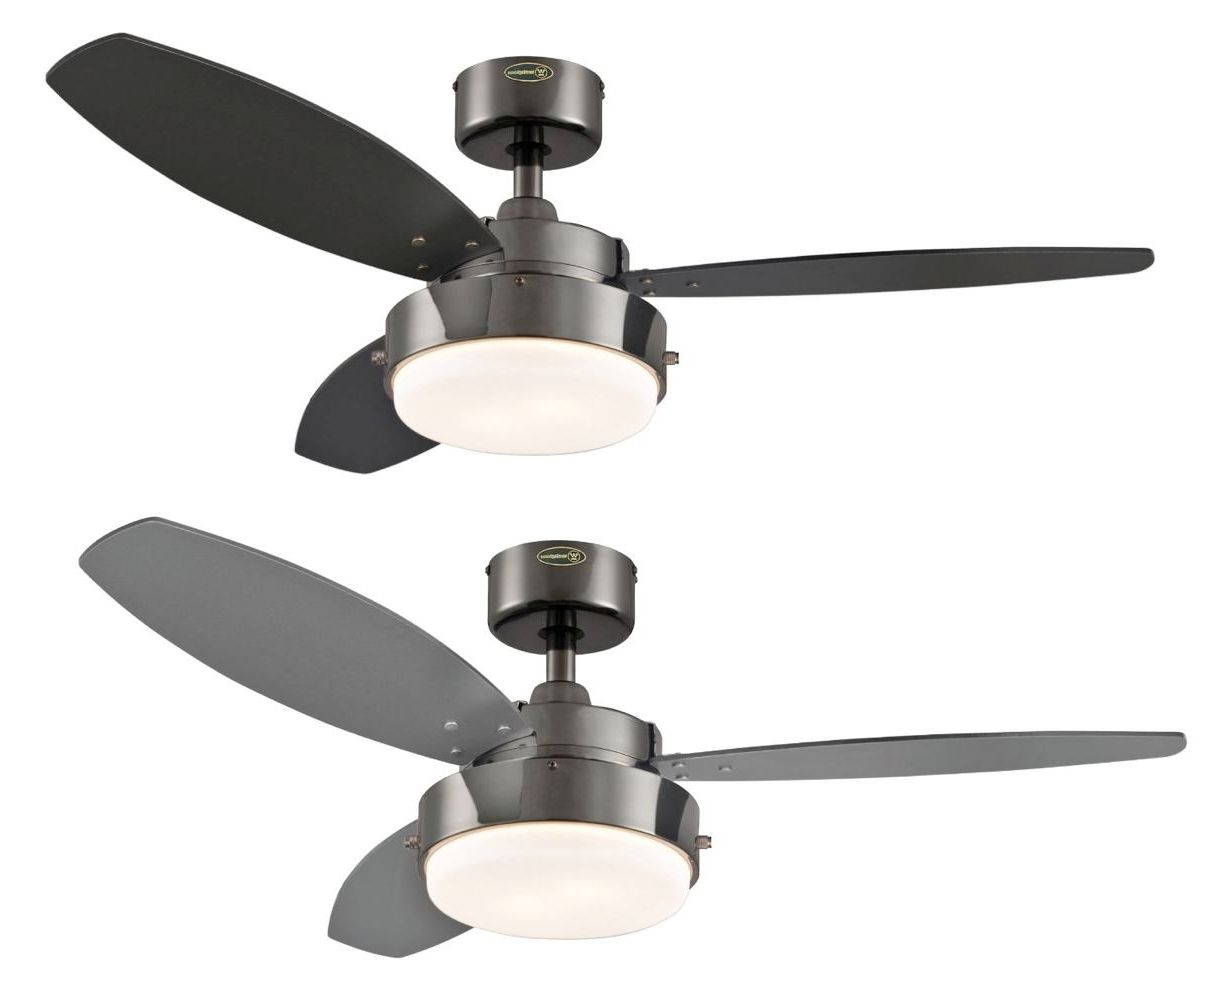 36 Inch Outdoor Ceiling Fans With Lights Intended For Popular 36 Outdoor Ceiling Fan – Photos House Interior And Fan (View 7 of 20)